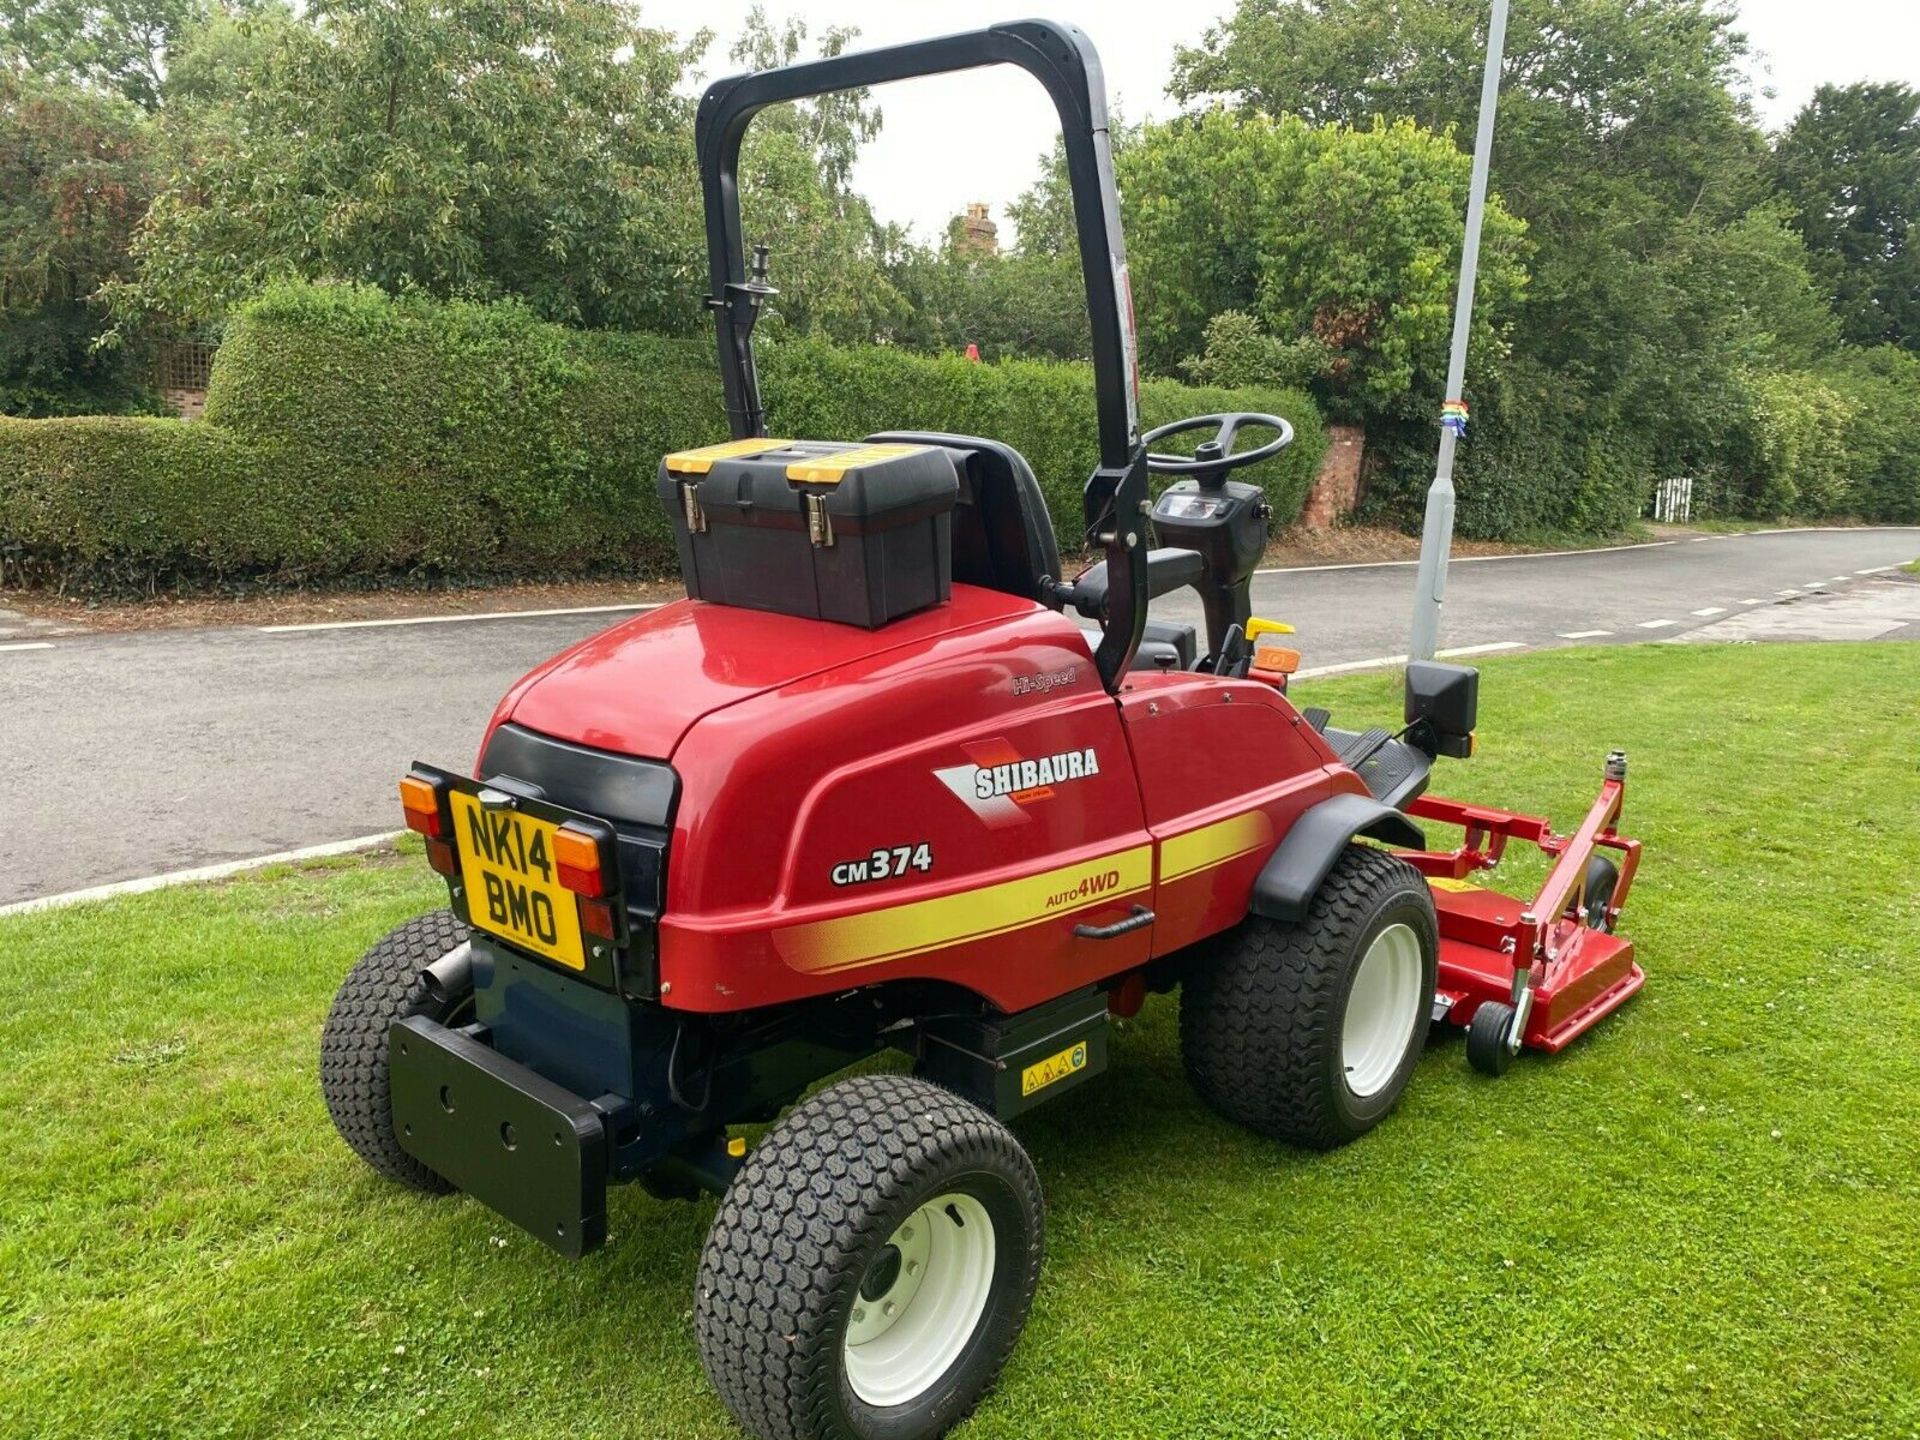 SHIBAURA CM374 UPFRONT ROTARY MOWER, 37HP, BRAND NEW 60" CUT DECK NEVER USED, DIESEL, YEAR 2014 - Image 4 of 7